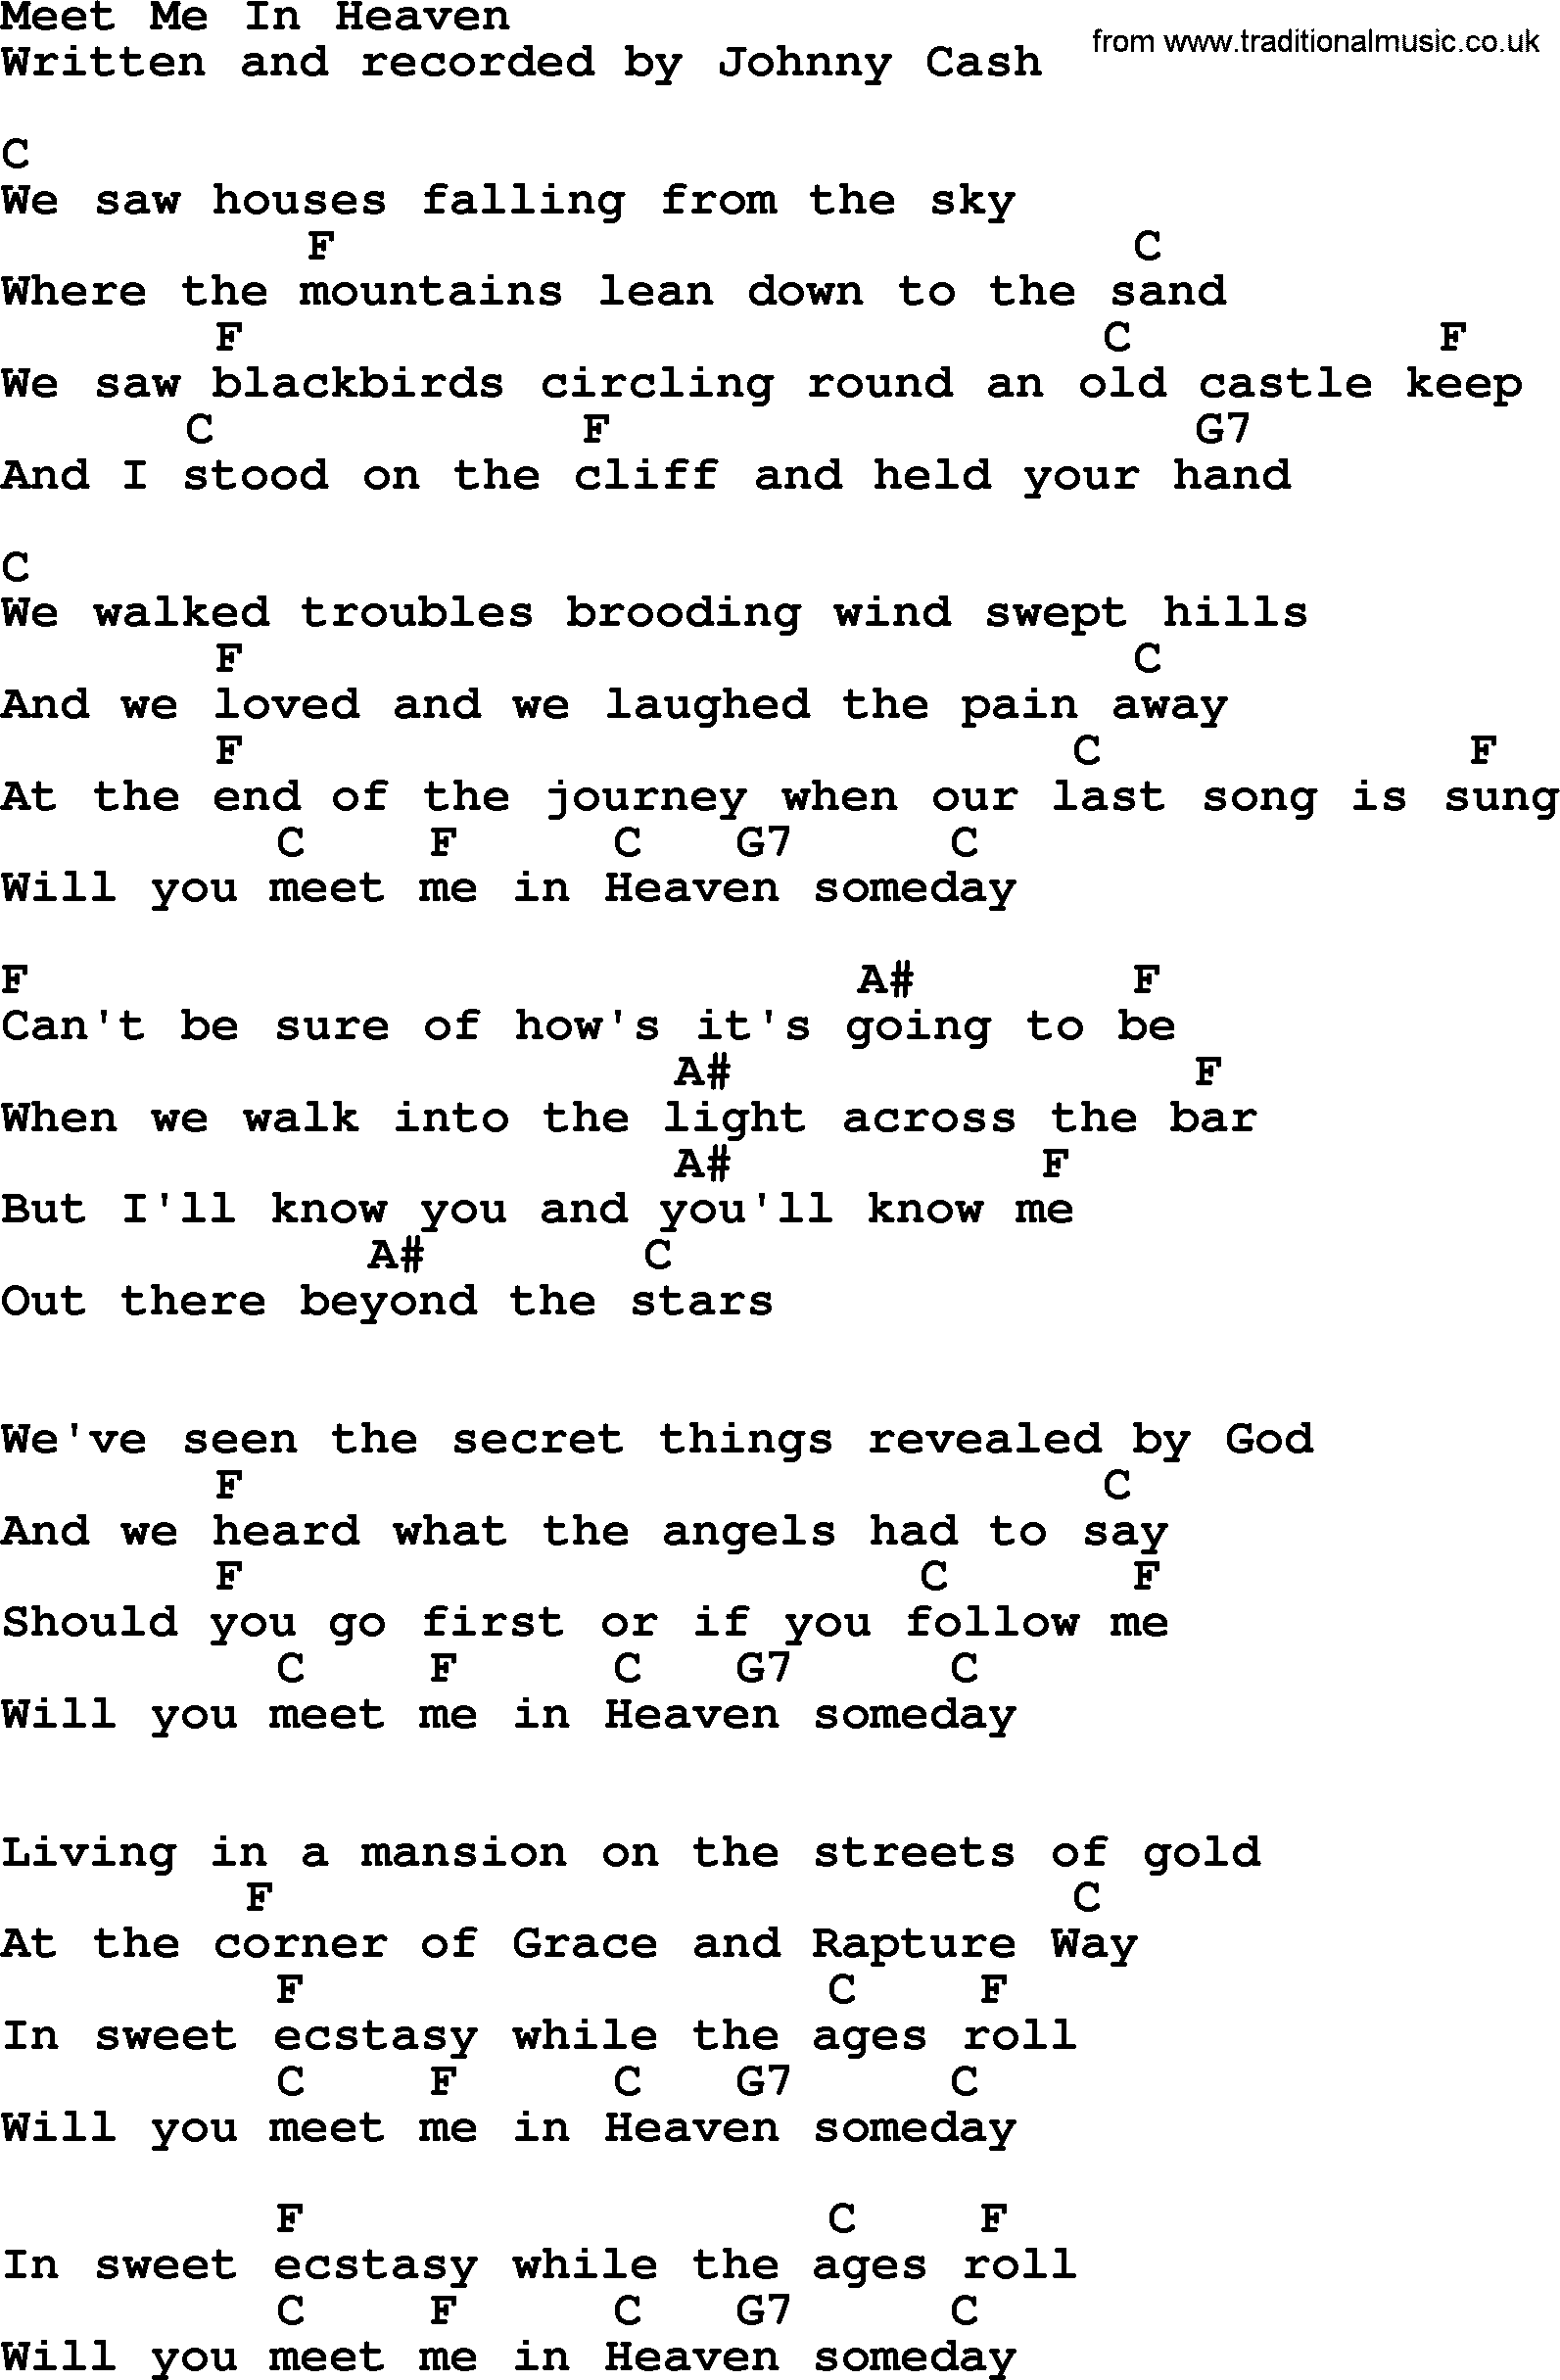 Johnny Cash song Meet Me In Heaven, lyrics and chords